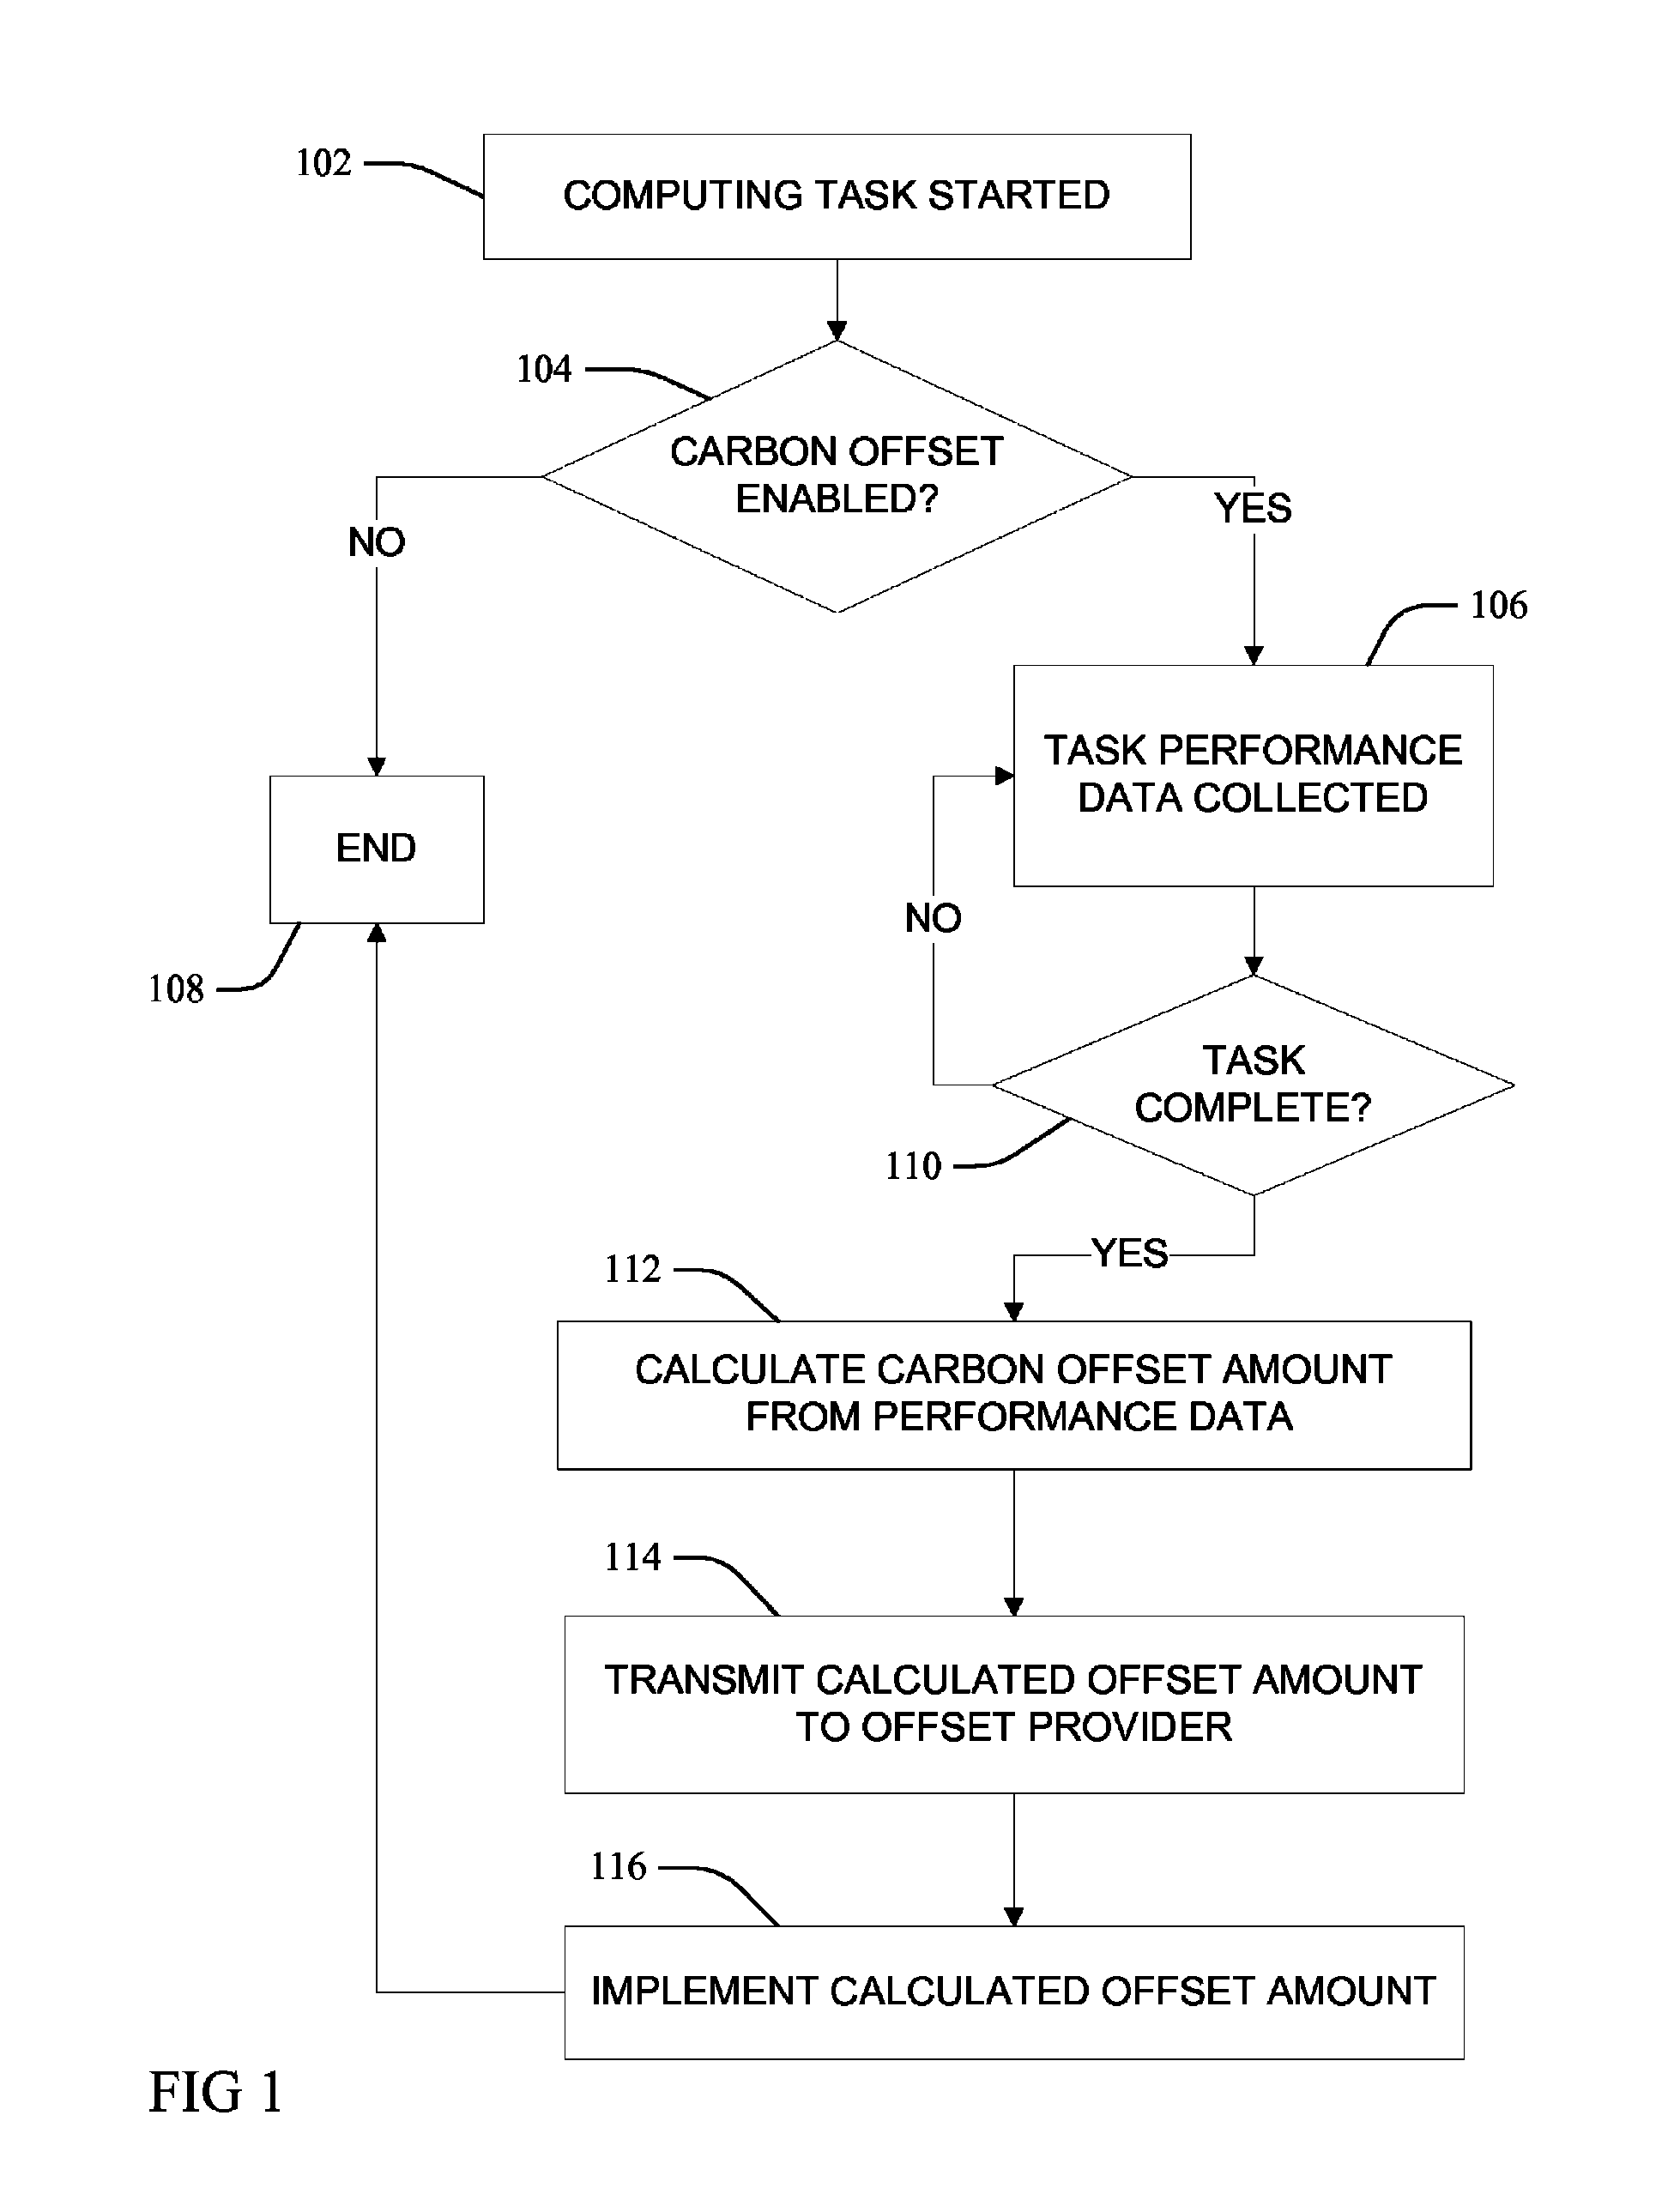 Calculating and communicating level of carbon offsetting required to compensate for performing a computing task